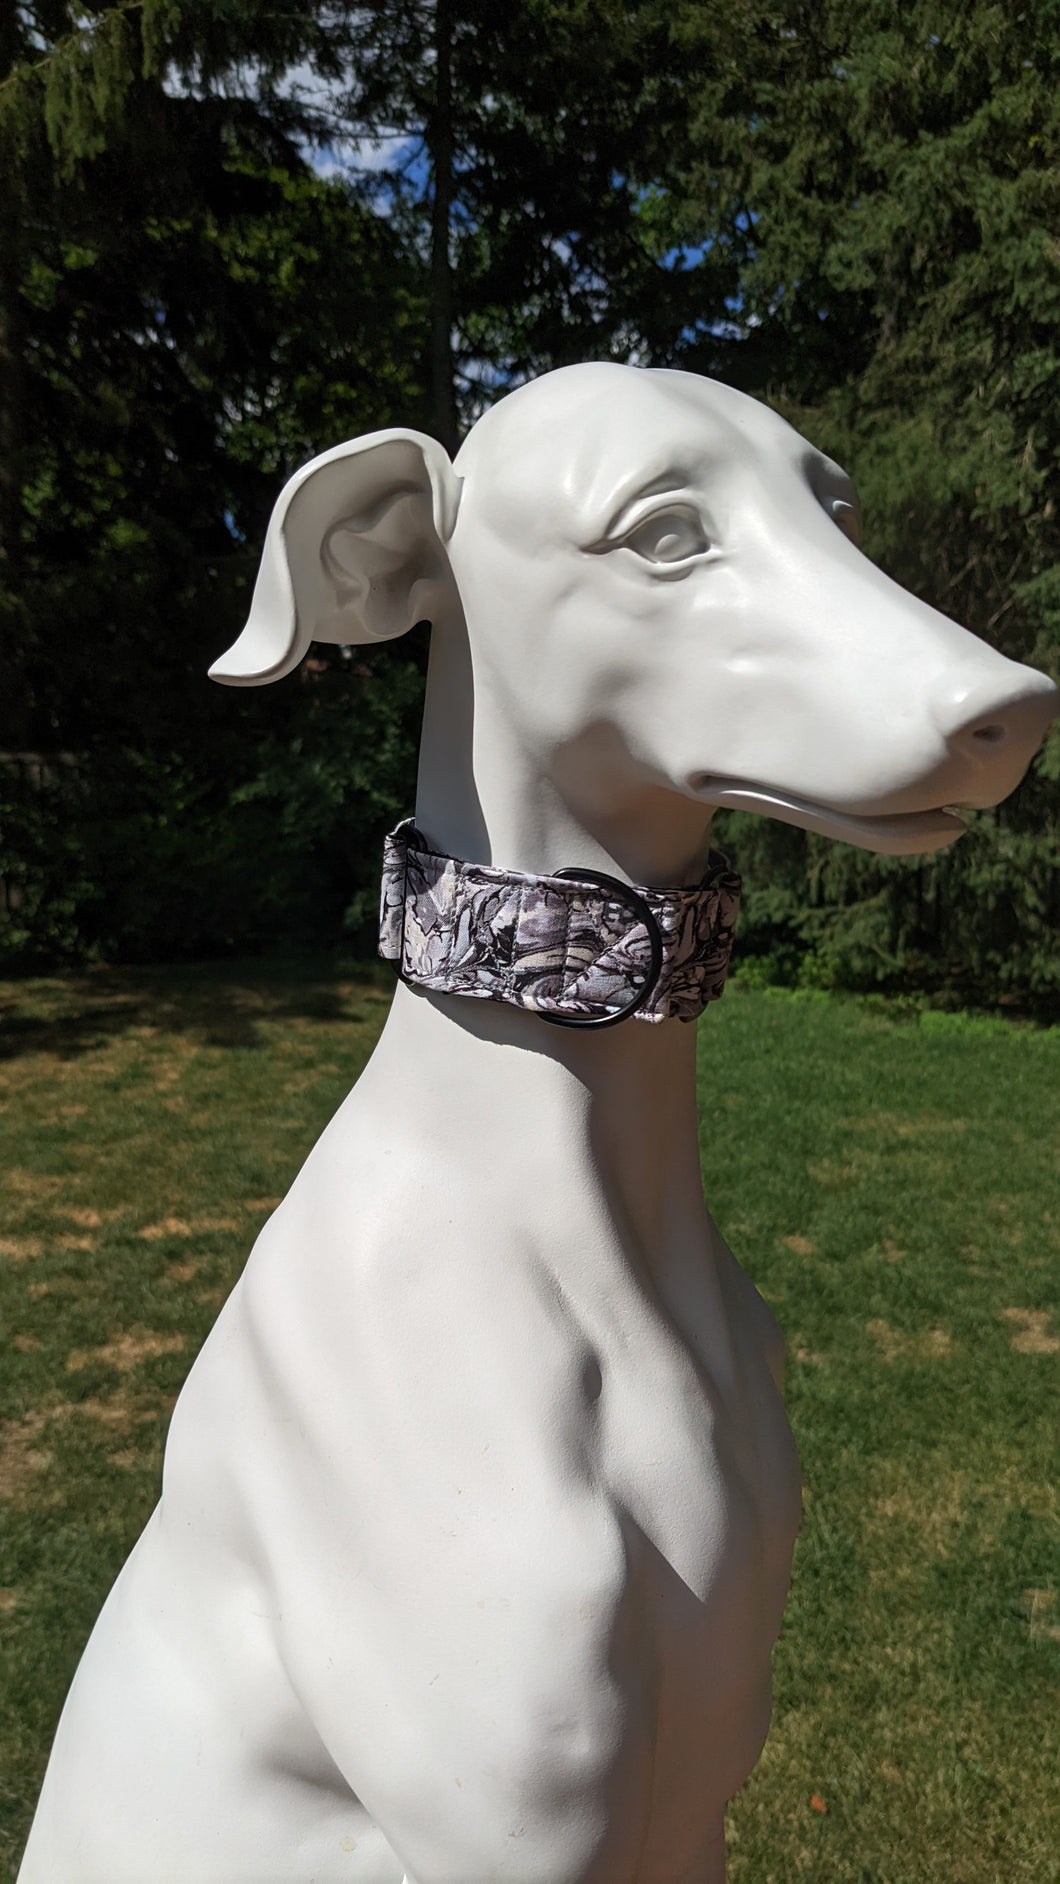 Granite martingale - Size Small - Ready to Ship